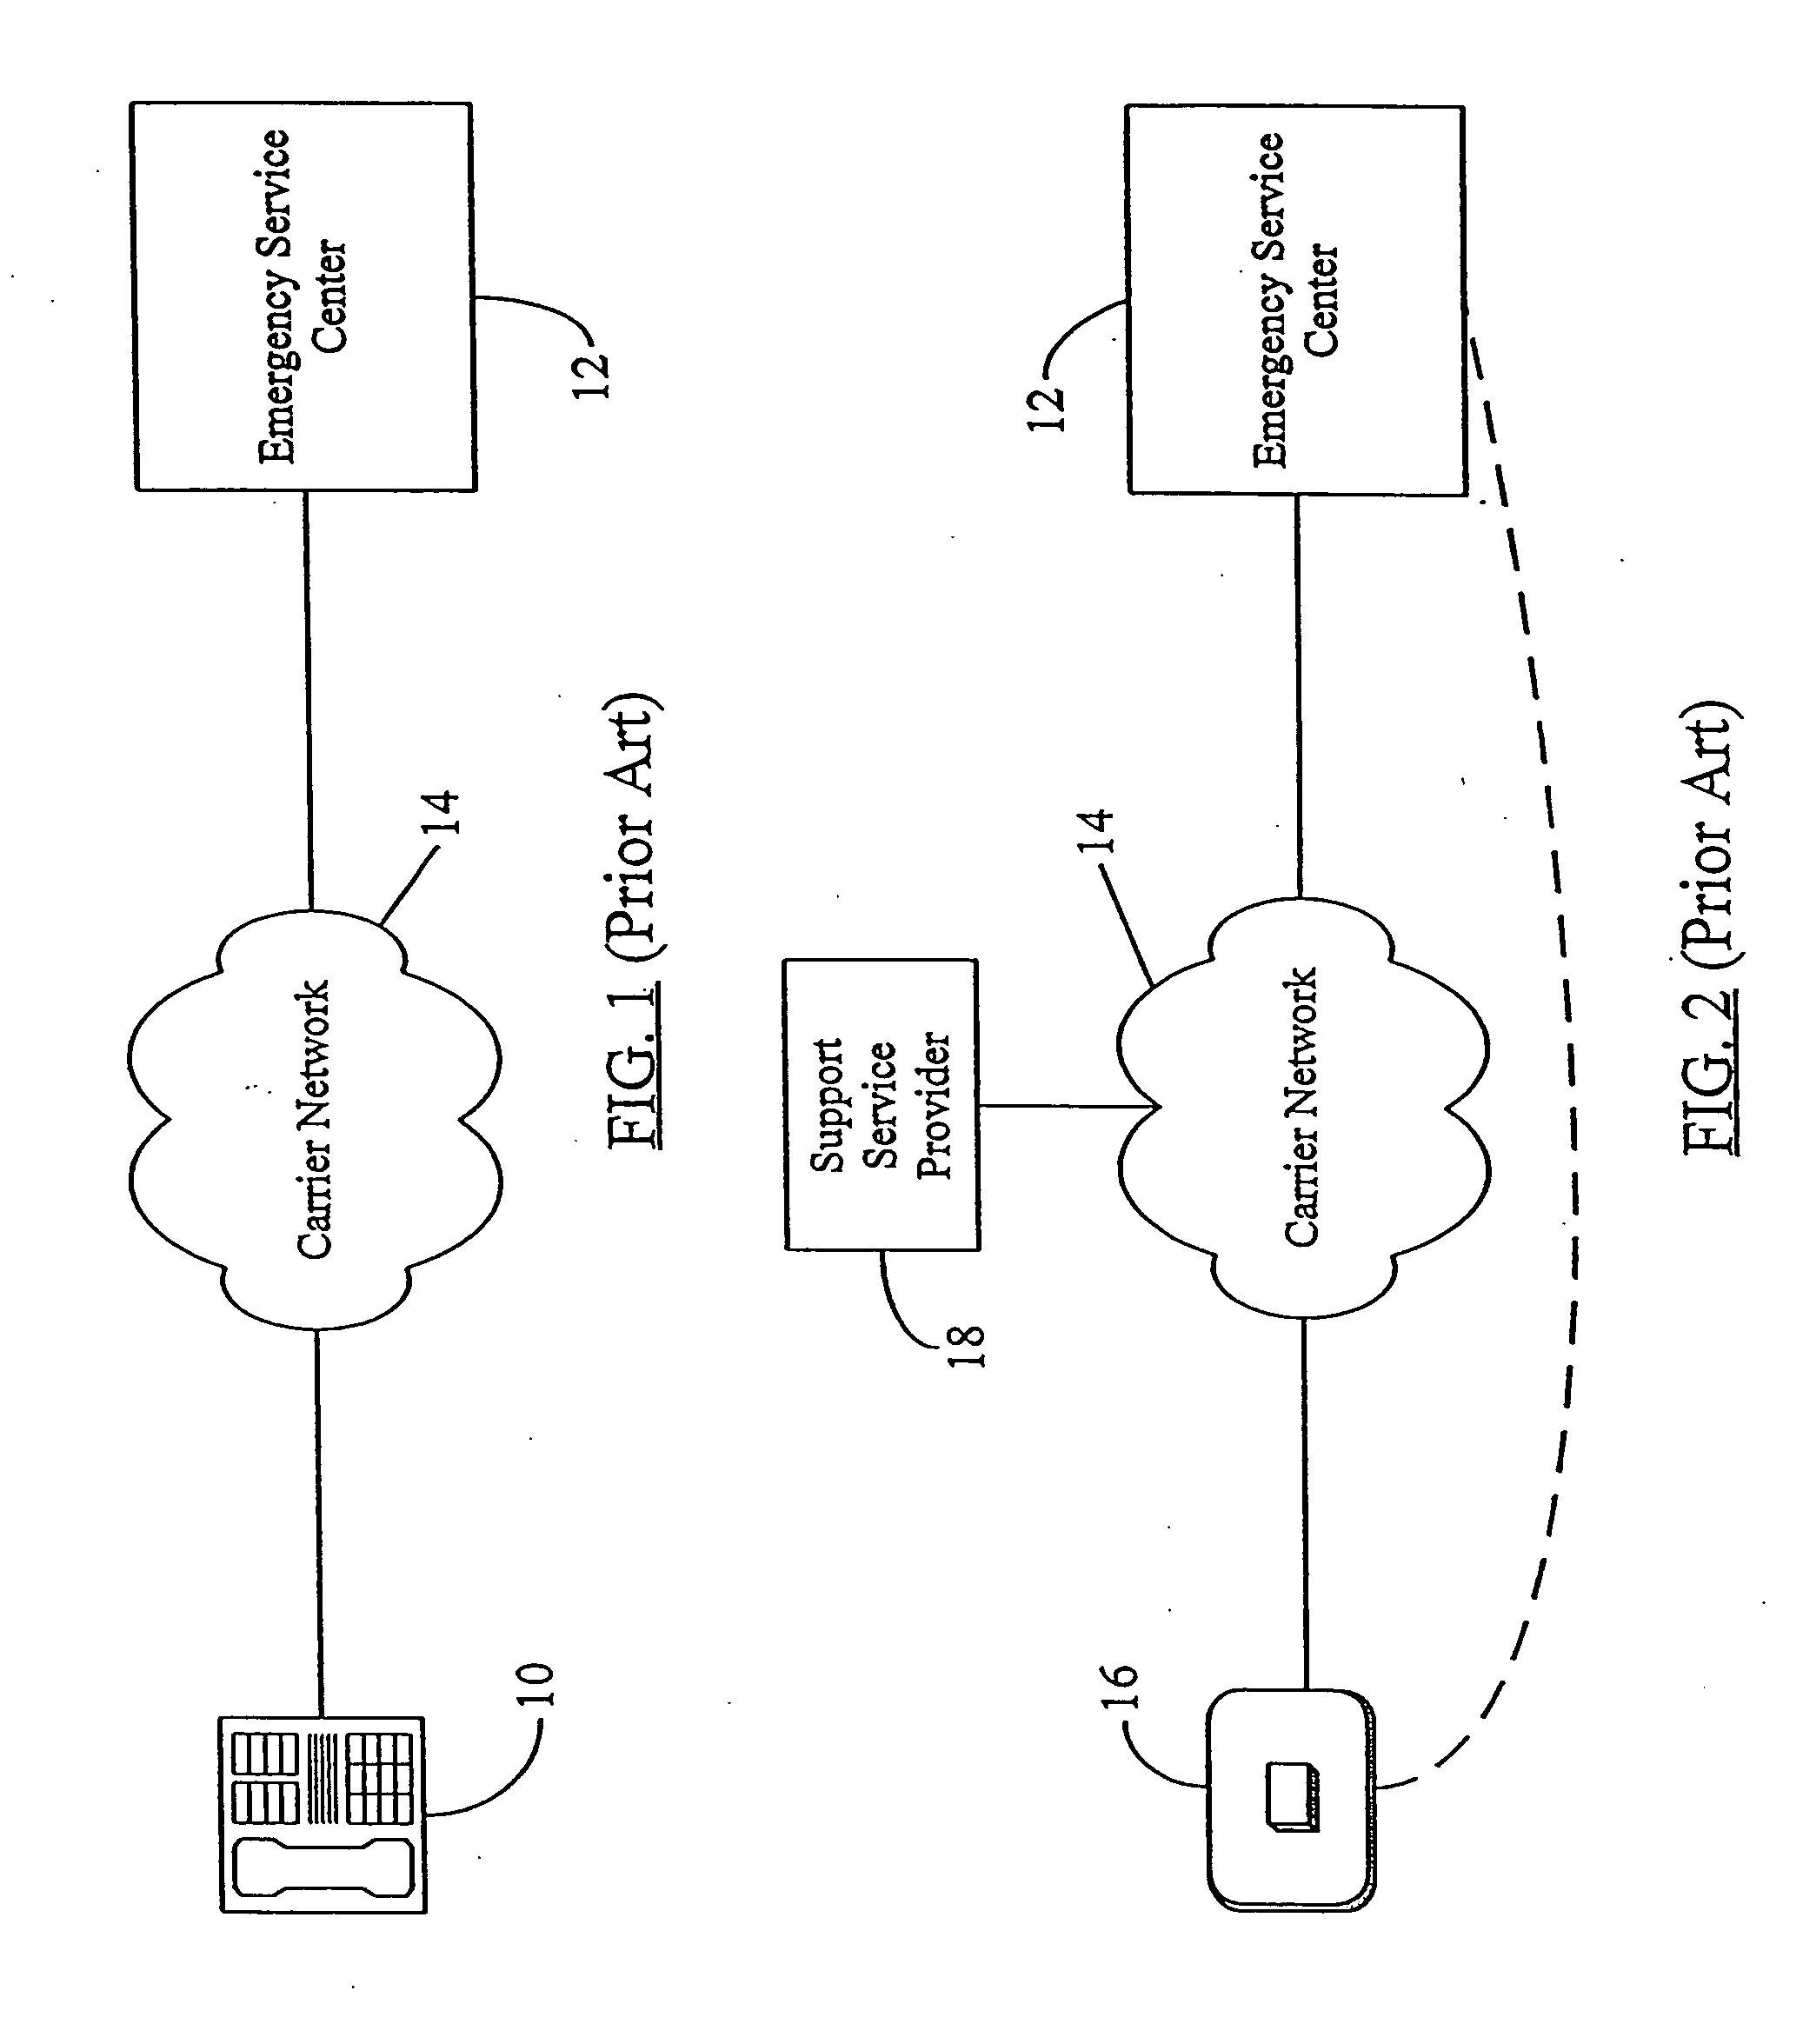 Method of facilitating access to IP-based emergency services